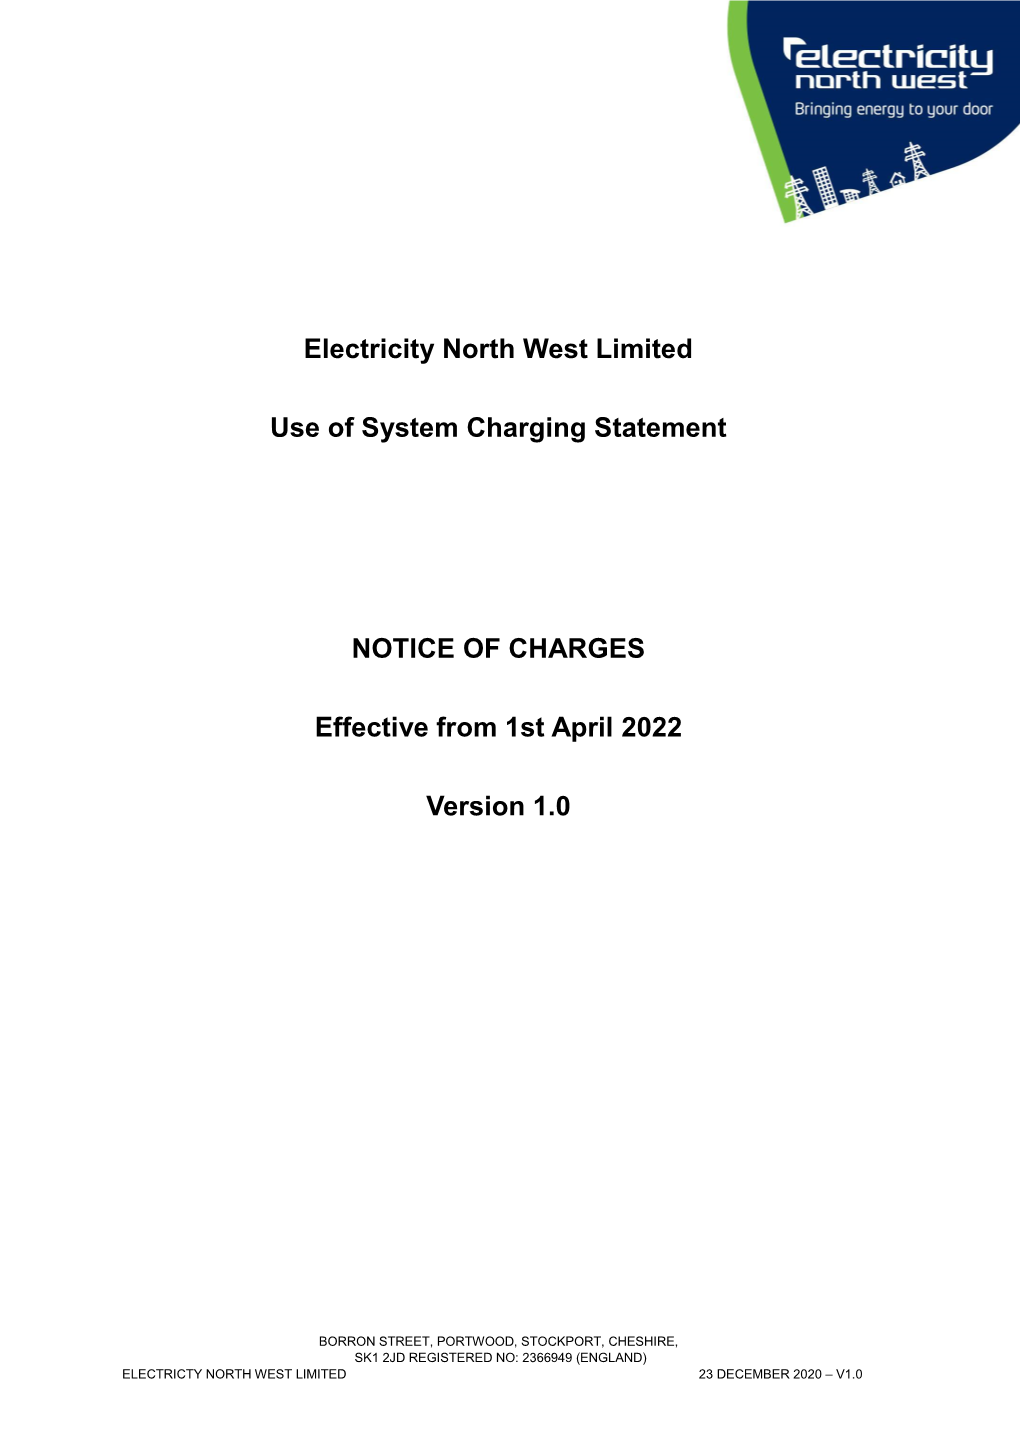 Electricity North West Limited Use of System Charging Statement